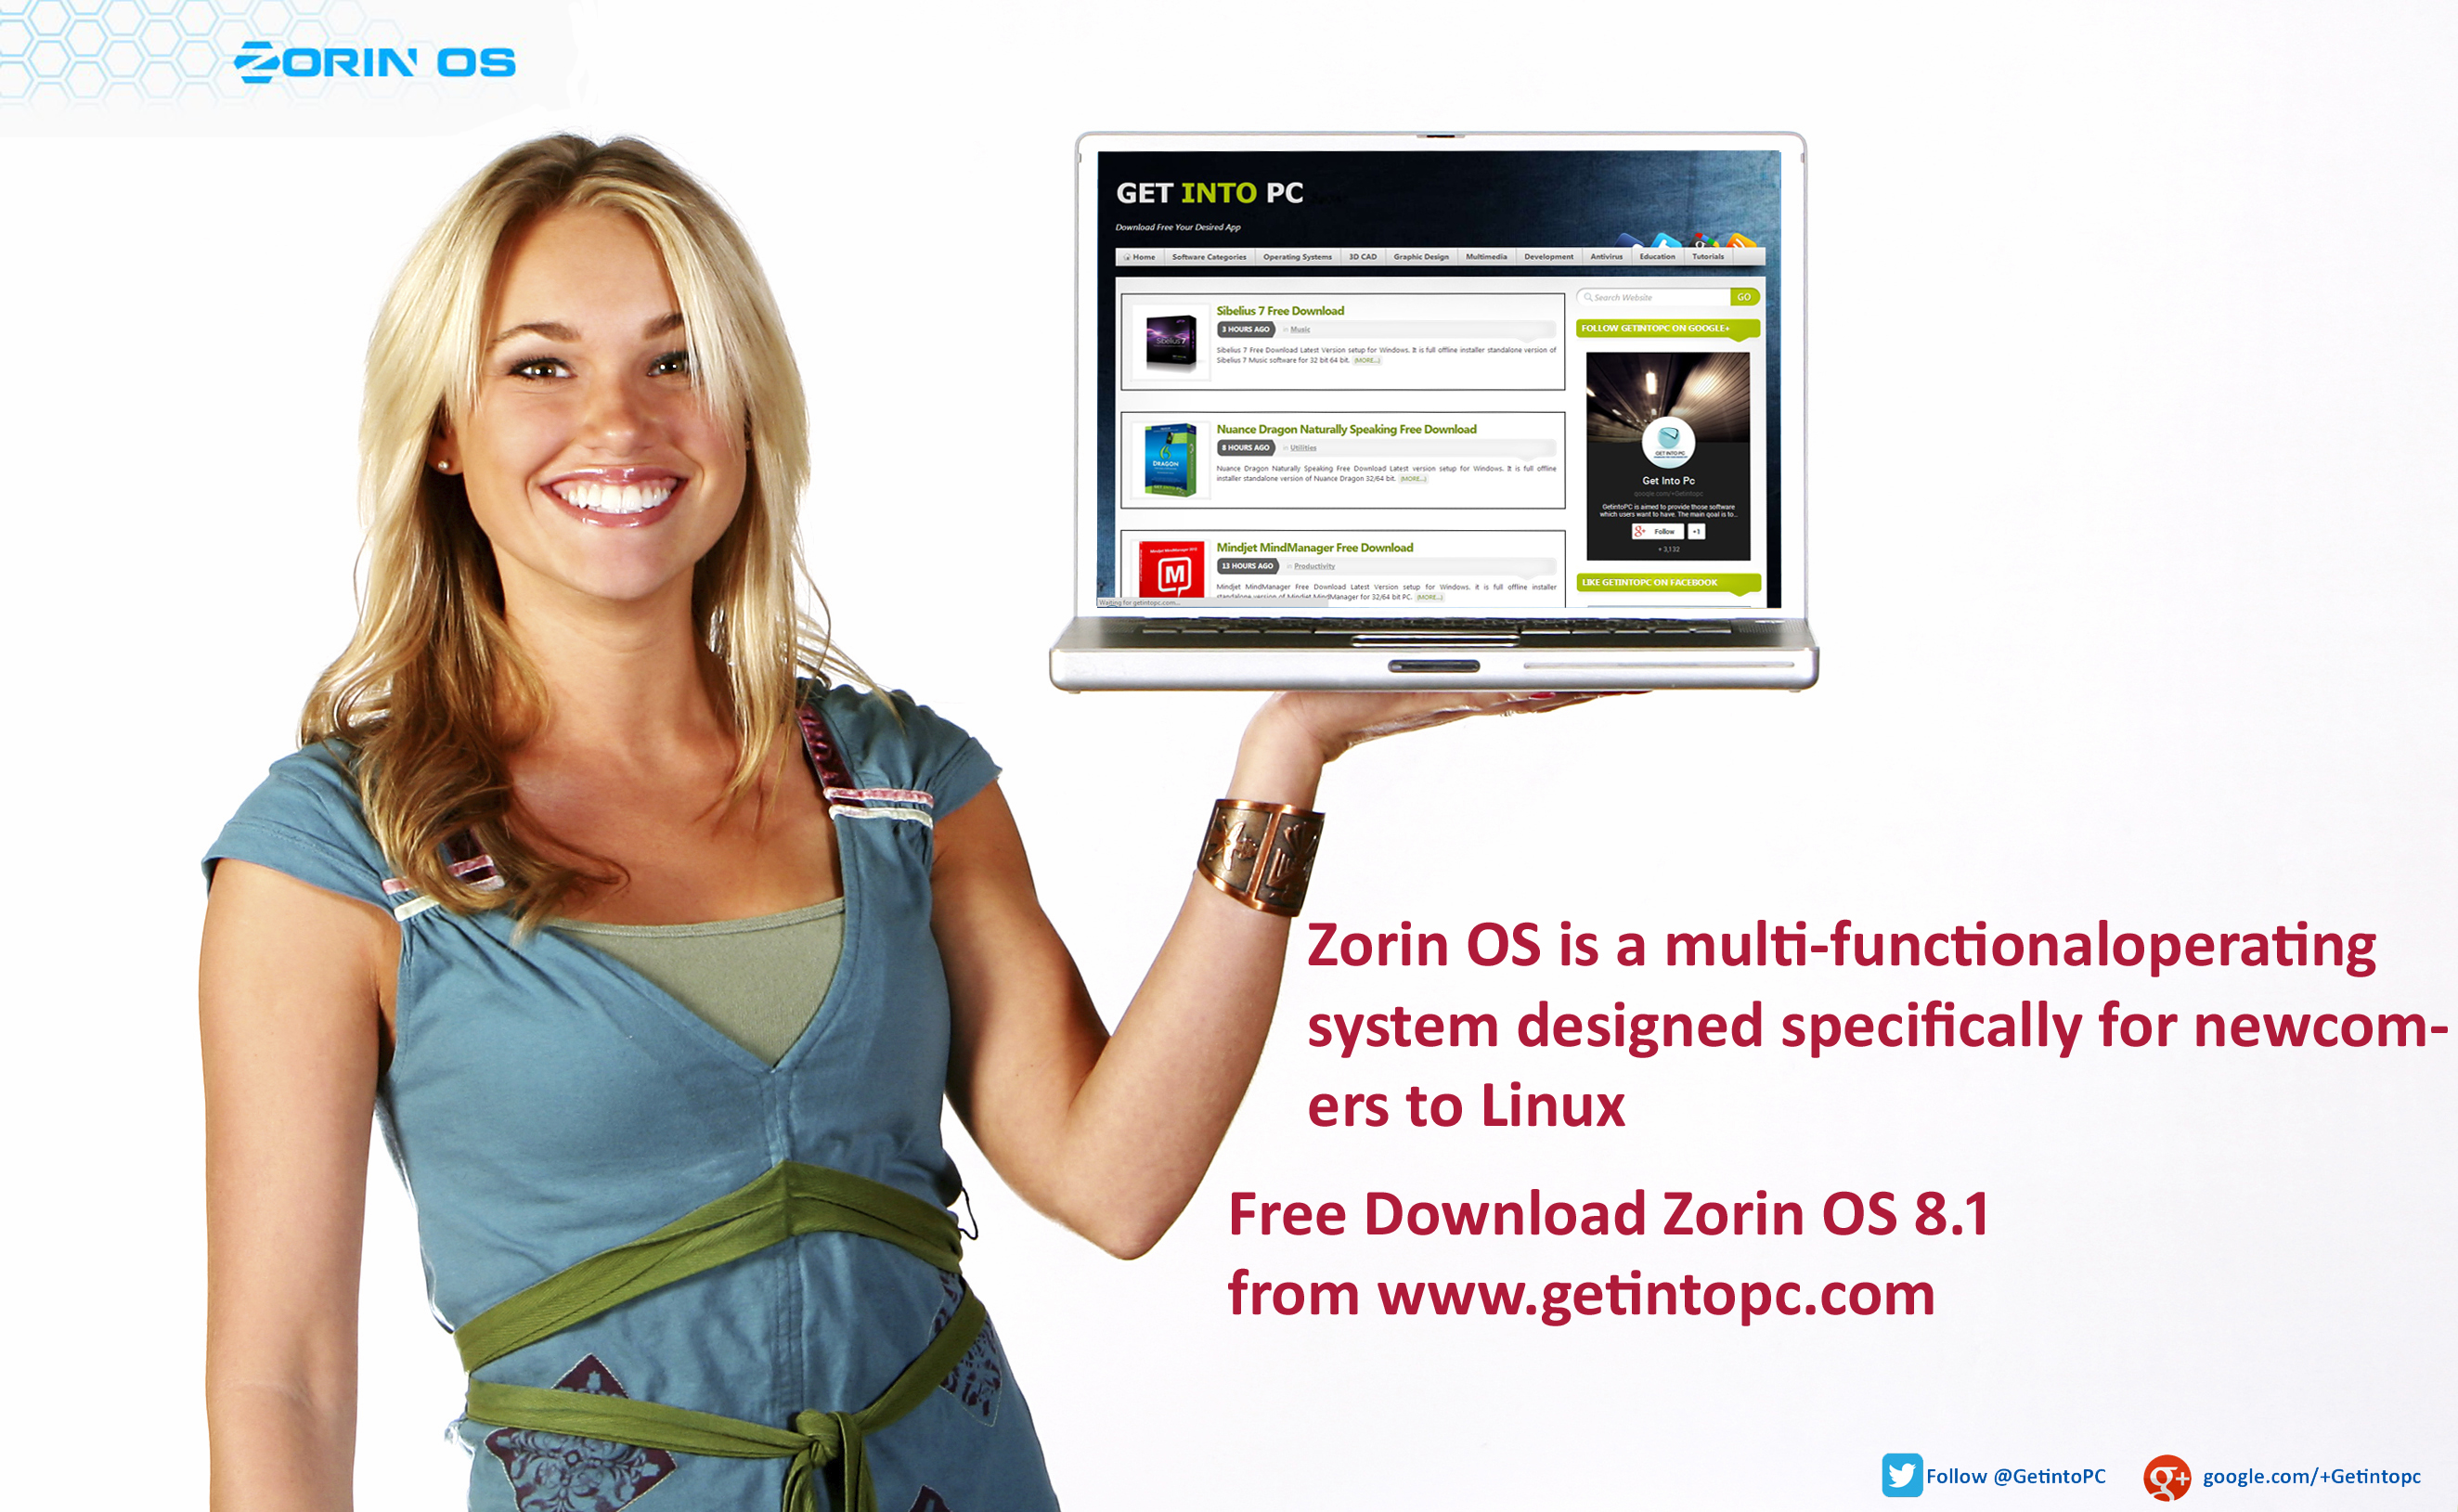 Zorin OS 8.1 Download From Getintopc.com